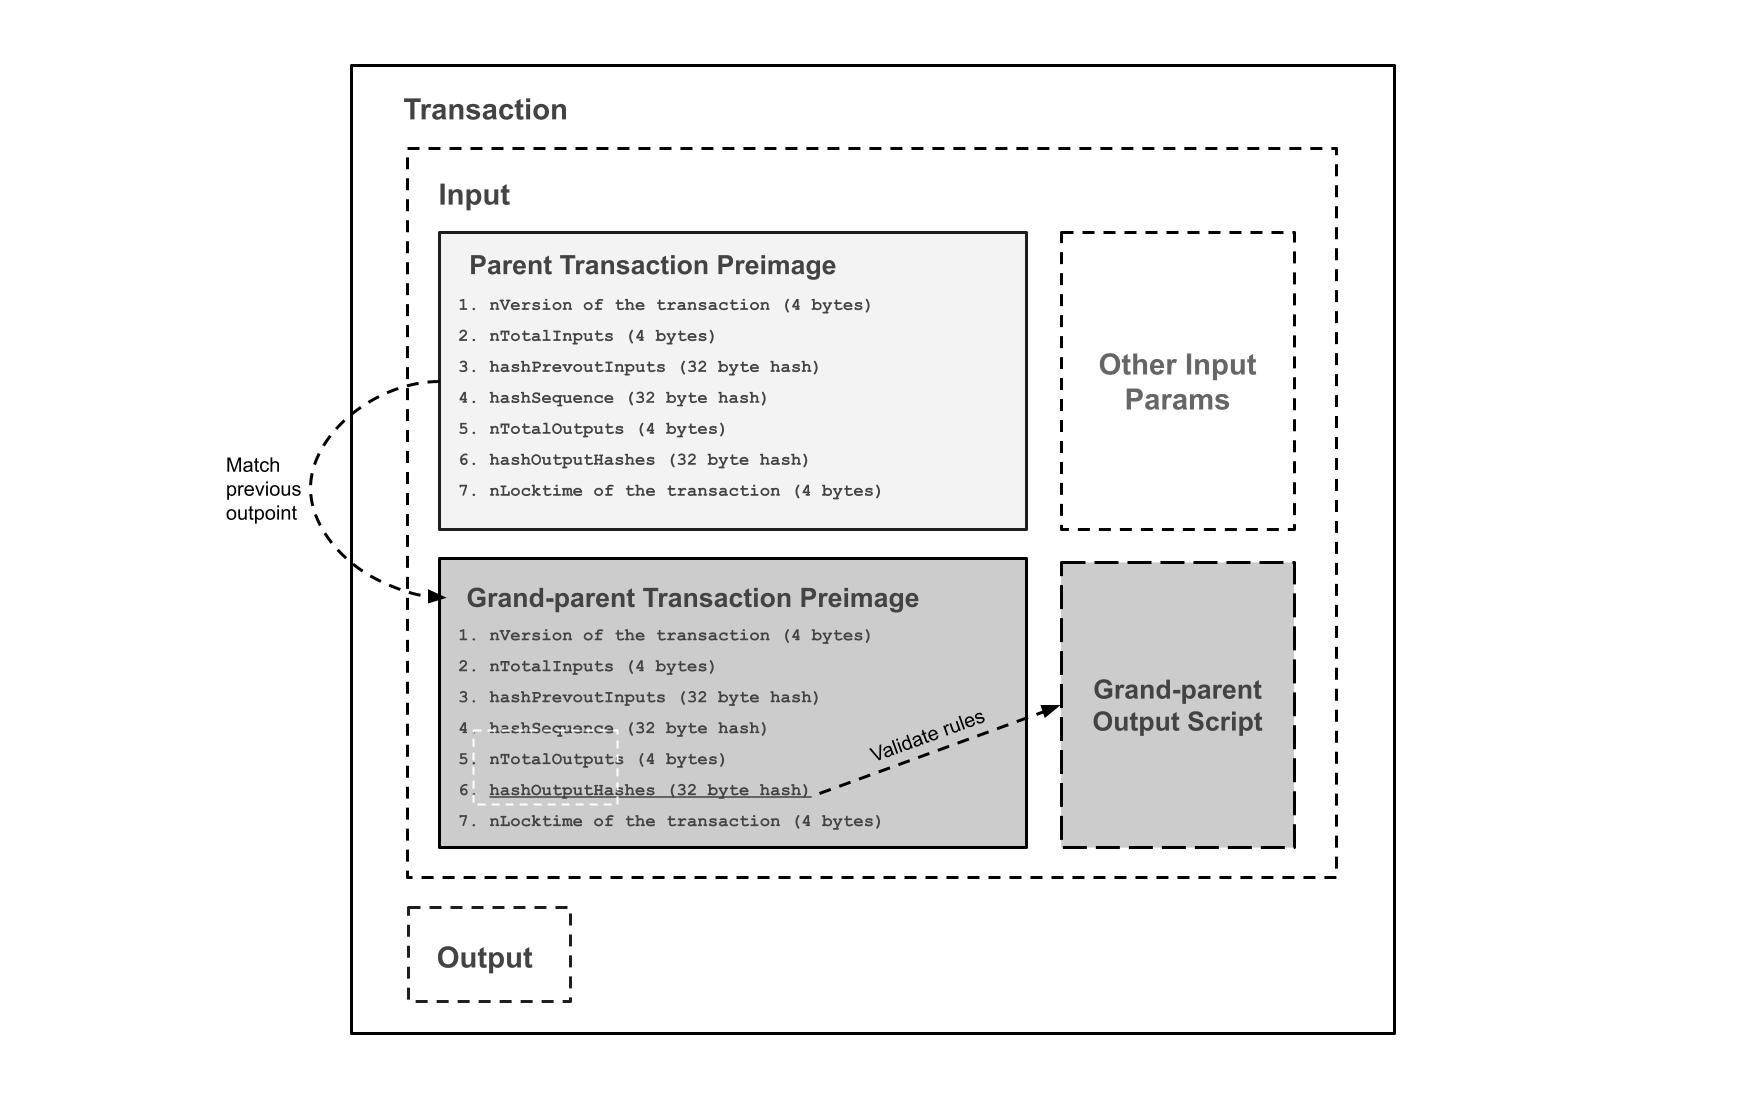 Diagram 7. Compressed parent transaction validation, mathematical induction proof by embedding the transaction hash version 3 preimage data-structure of the parent and grand-parent to enforce arbitrary rules and constraints.